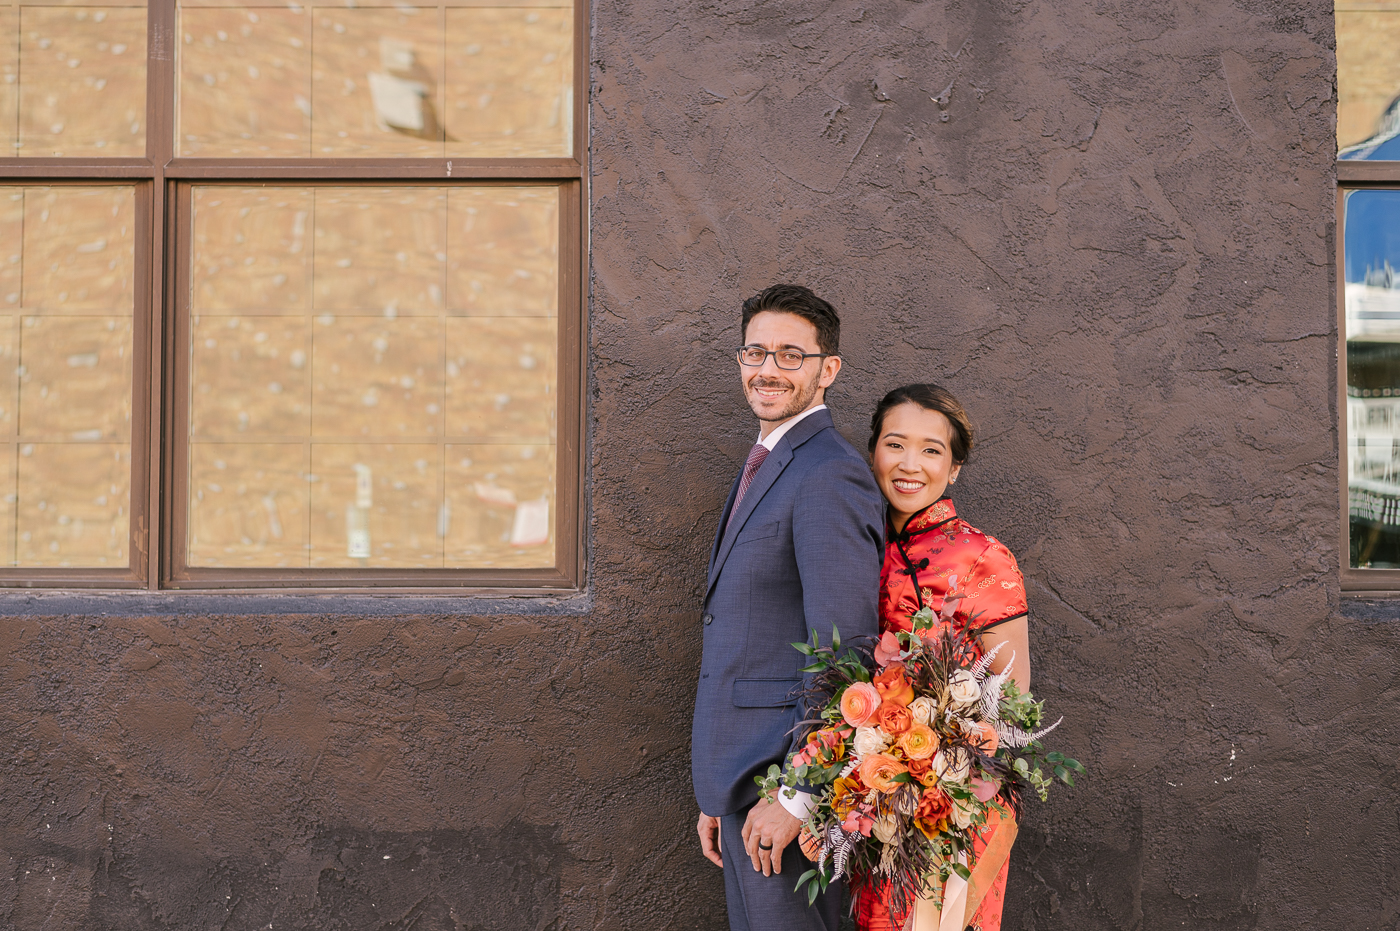 Two Bridal Outfits are Better than One! Newlyweds side by side smiling in front of a black wall that lets their outfits and the wedding bouquet really pop with color 